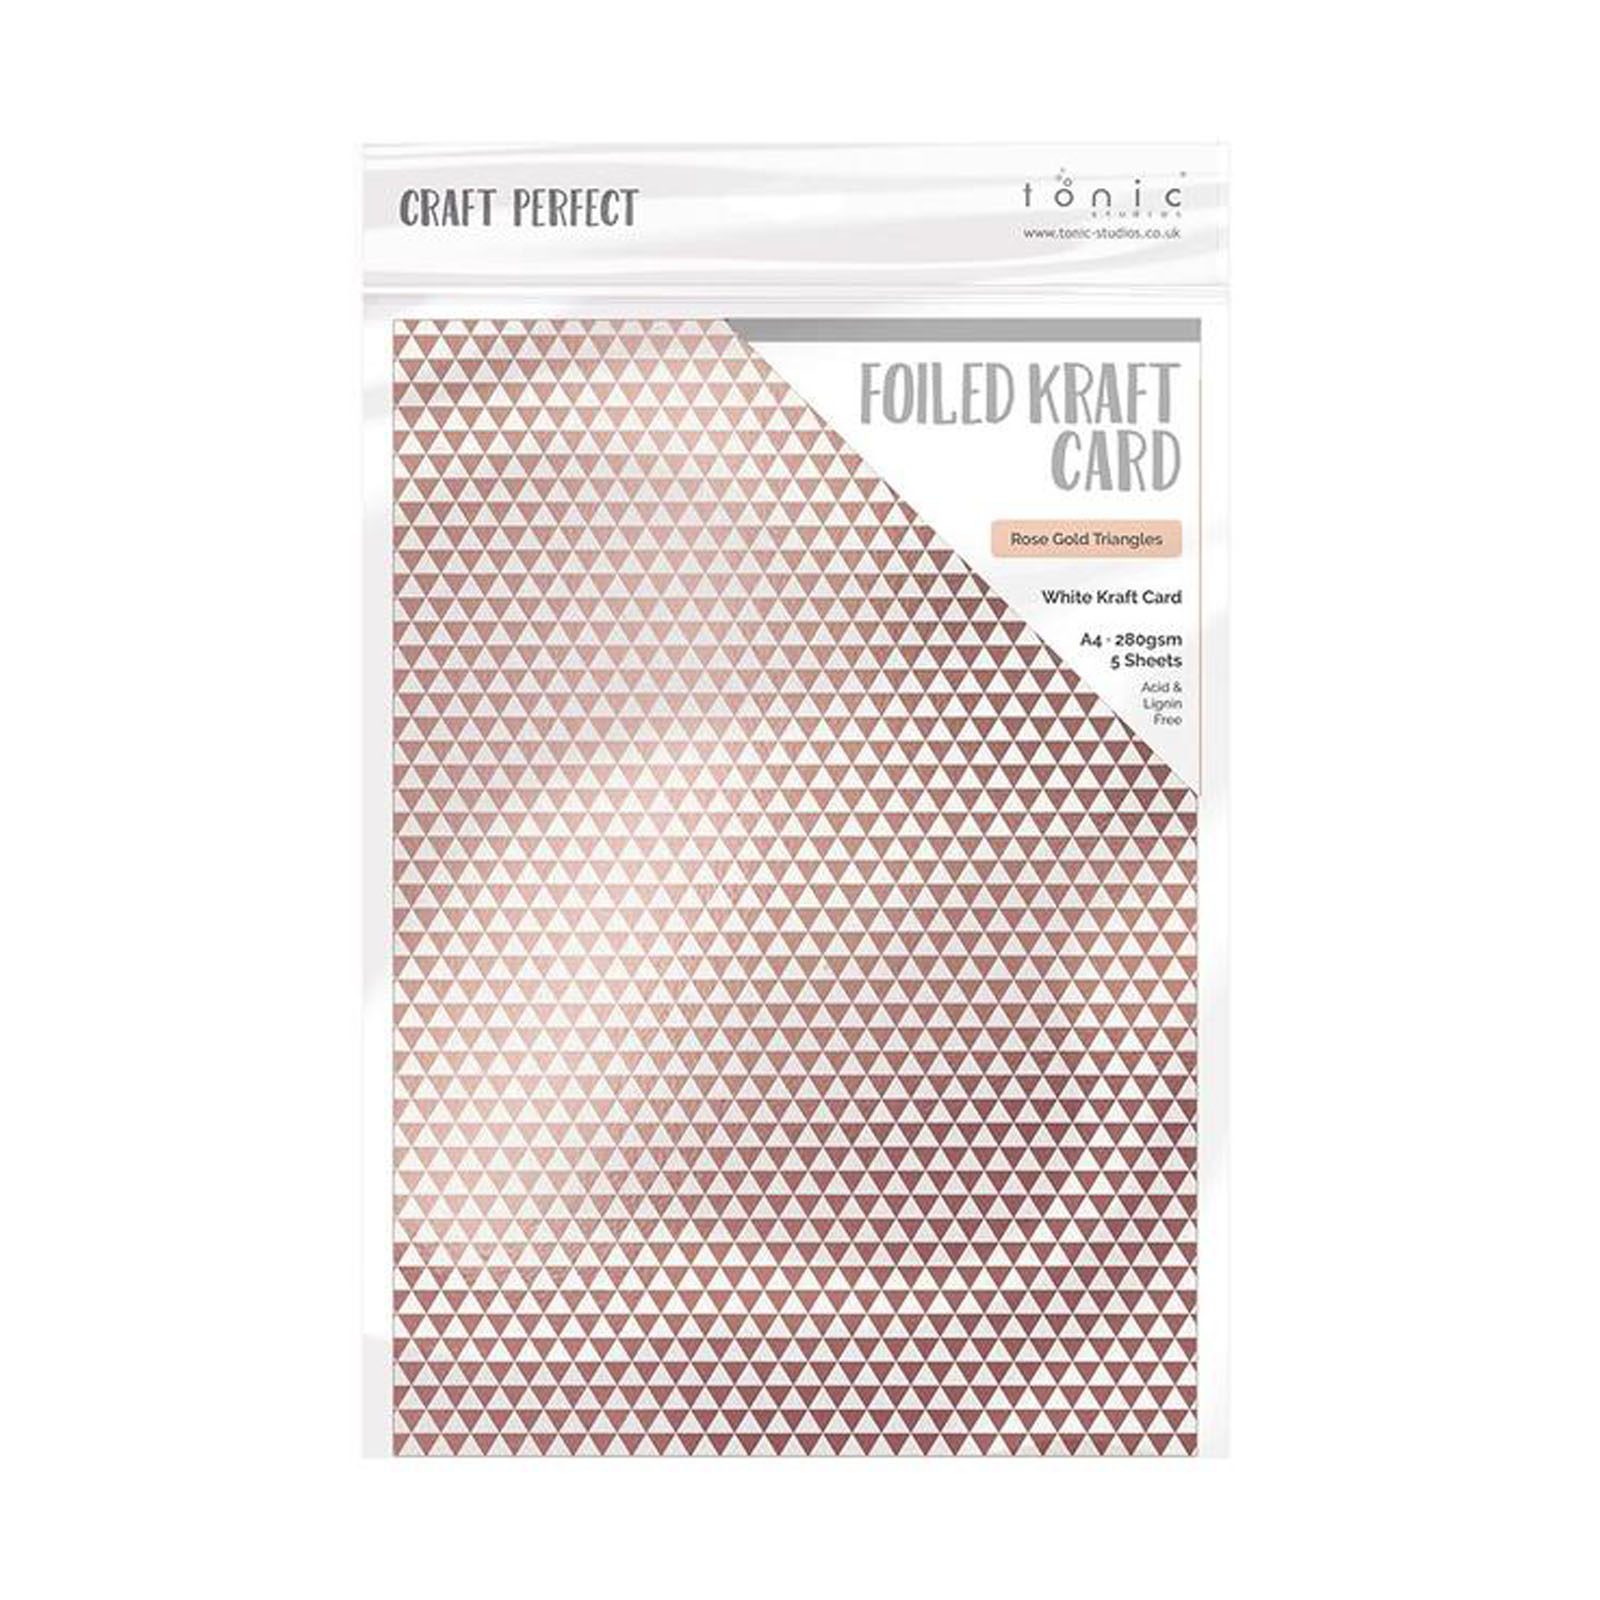 Craft Perfect • Foiled kraft card A4 x5 280g Triangles